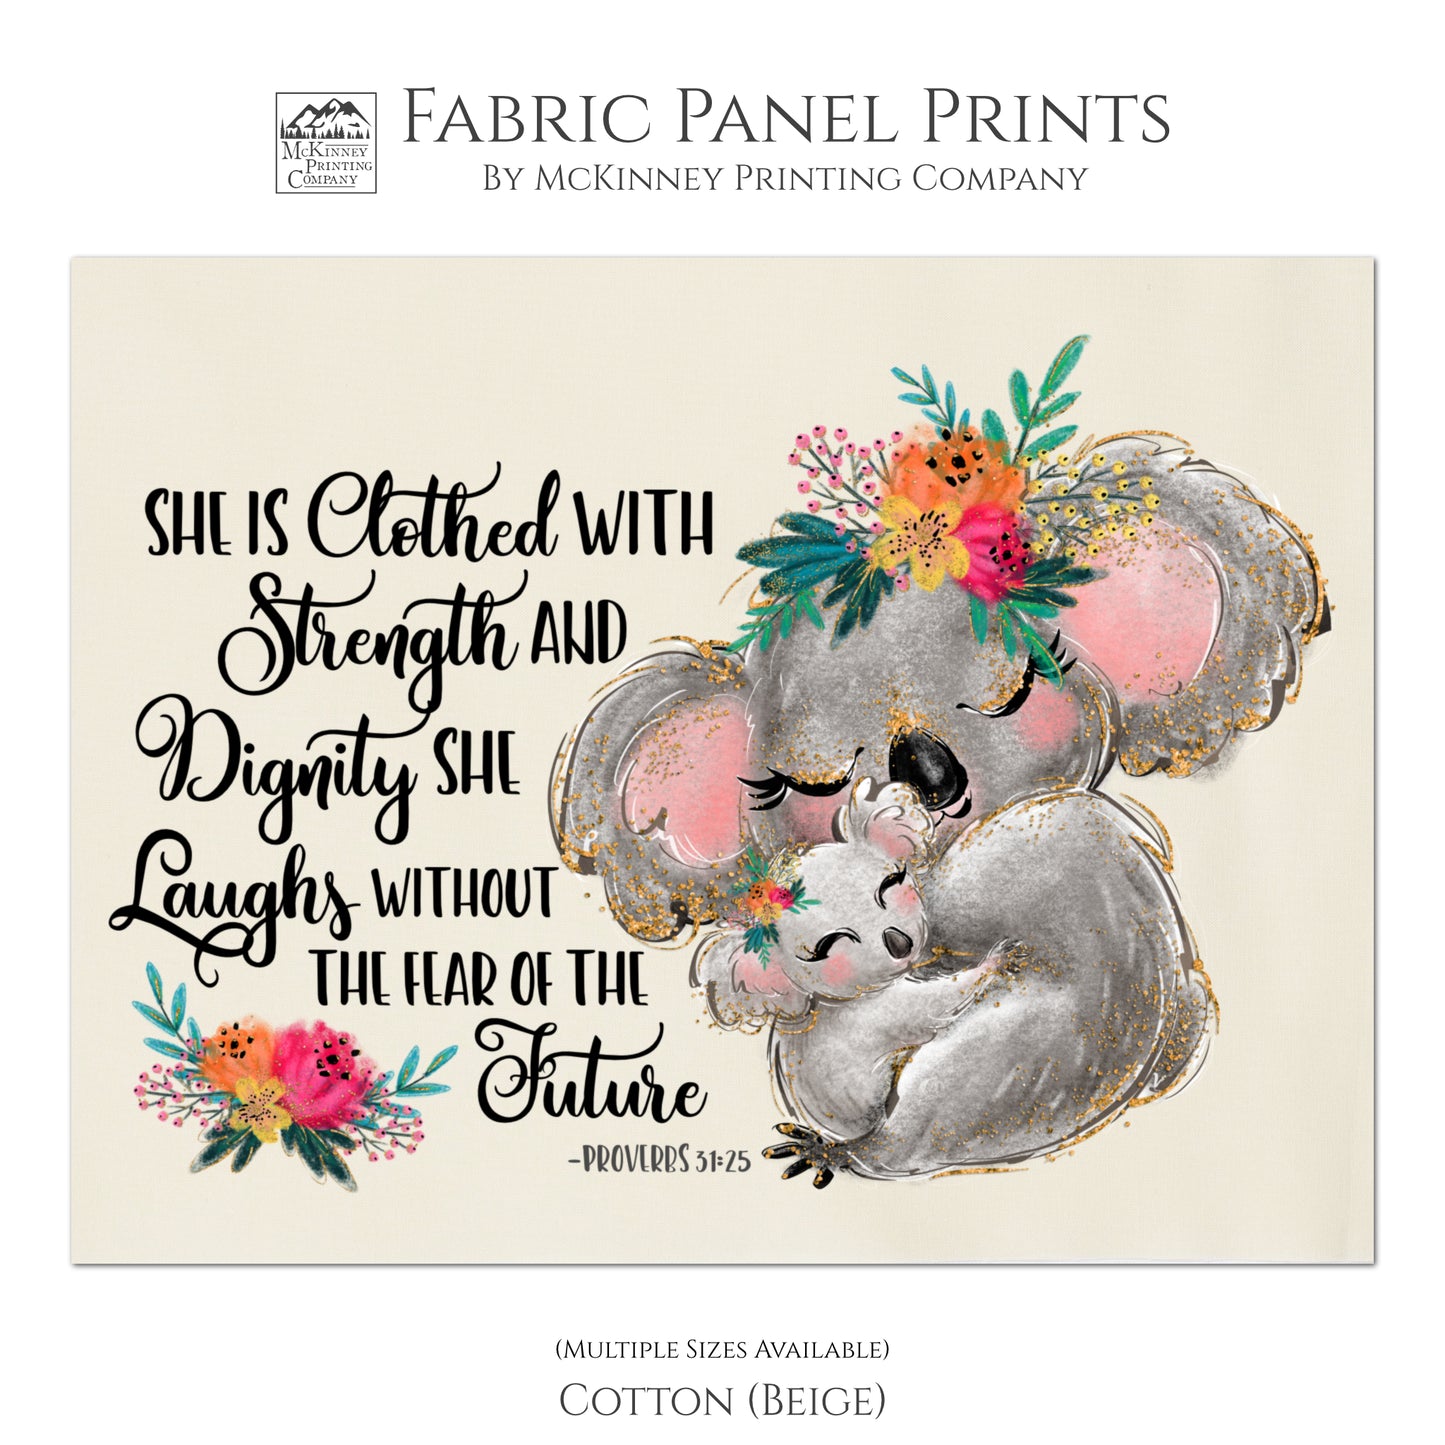 She is clothed with strength and dignity, she laughs without the fear of the future. - Proverbs 31:25 - Baby Fabric Panels, Quilt Block, Fabric Panel Print - Cotton